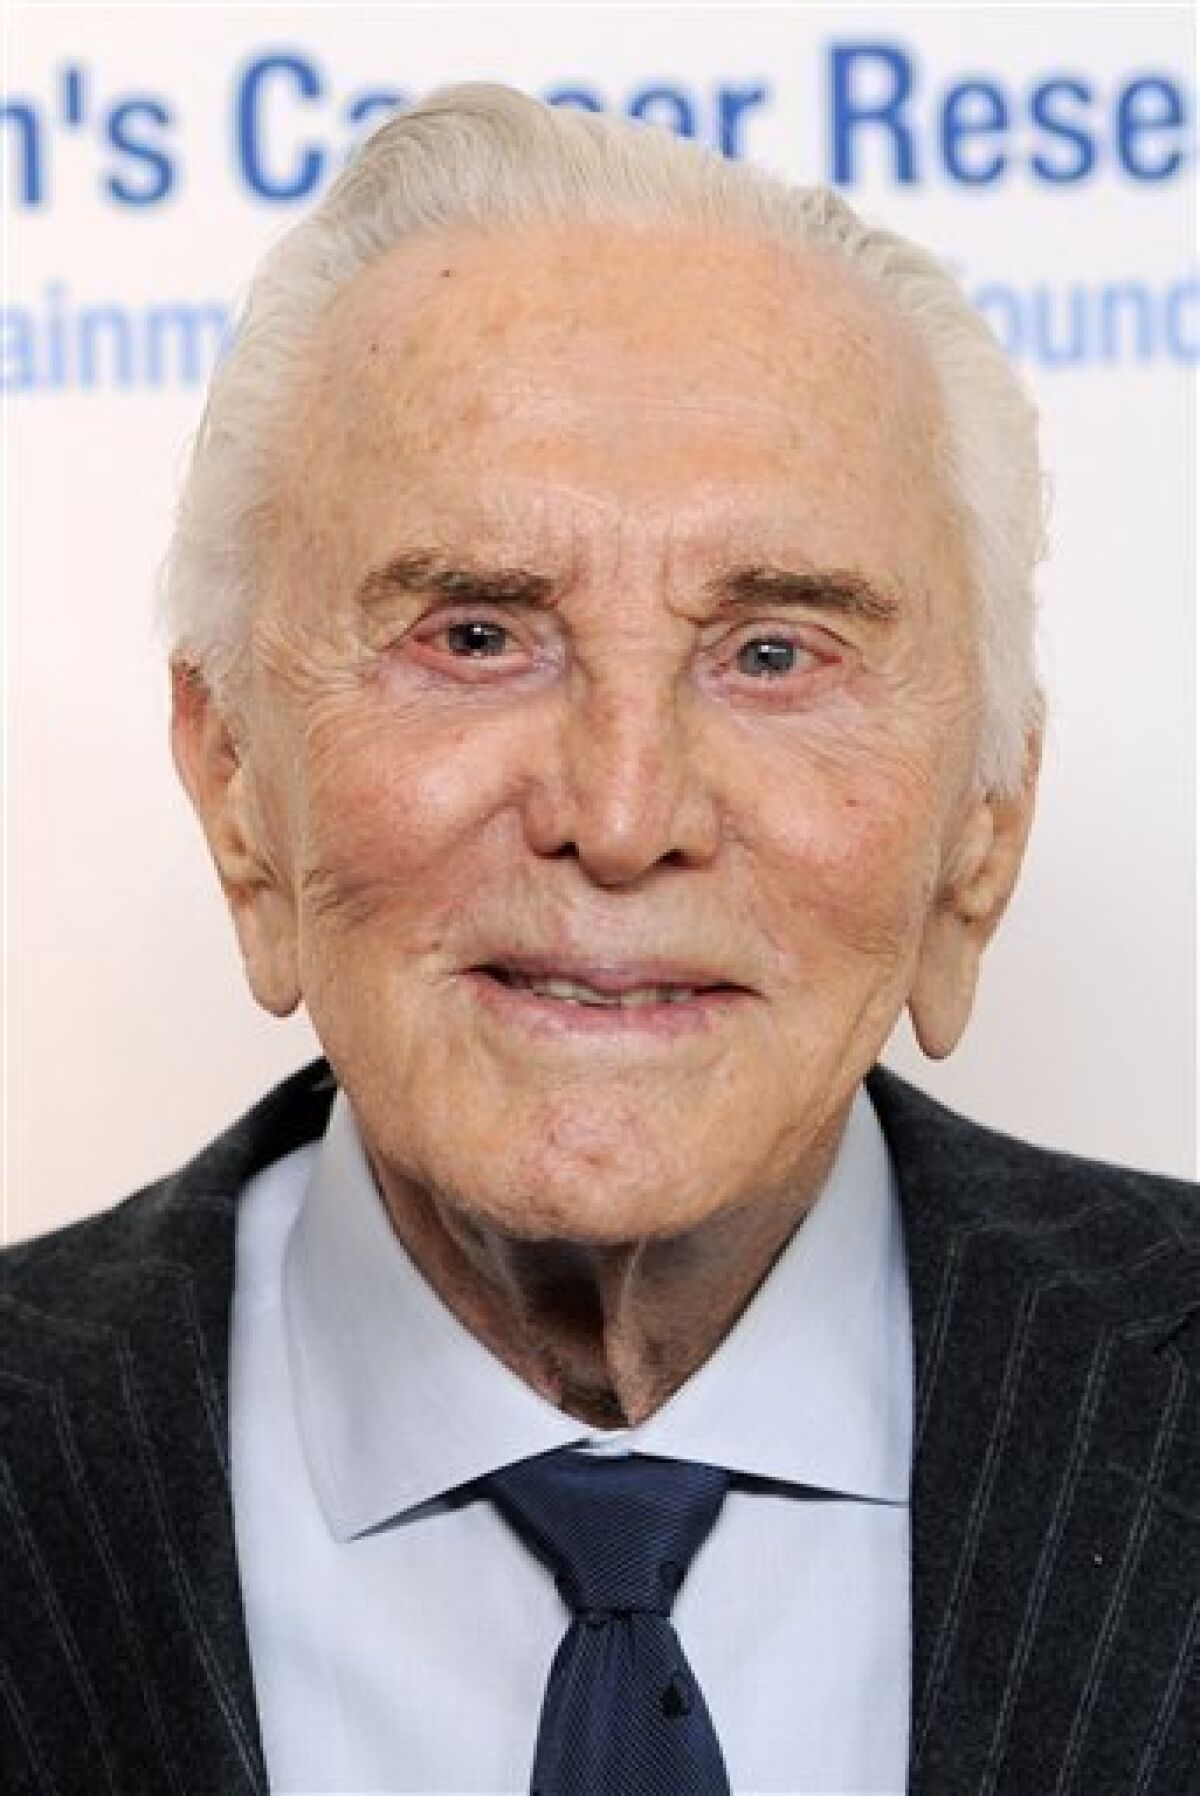 FILE - In this Feb. 10, 2011 file photo, actor Kirk Douglas arrives at the annual "An Unforgettable Evening" event benefiting the Entertainment Industry Foundation's Women's Cancer Research Fund, in Beverly Hills, Calif. (AP Photo/Chris Pizzello, file)